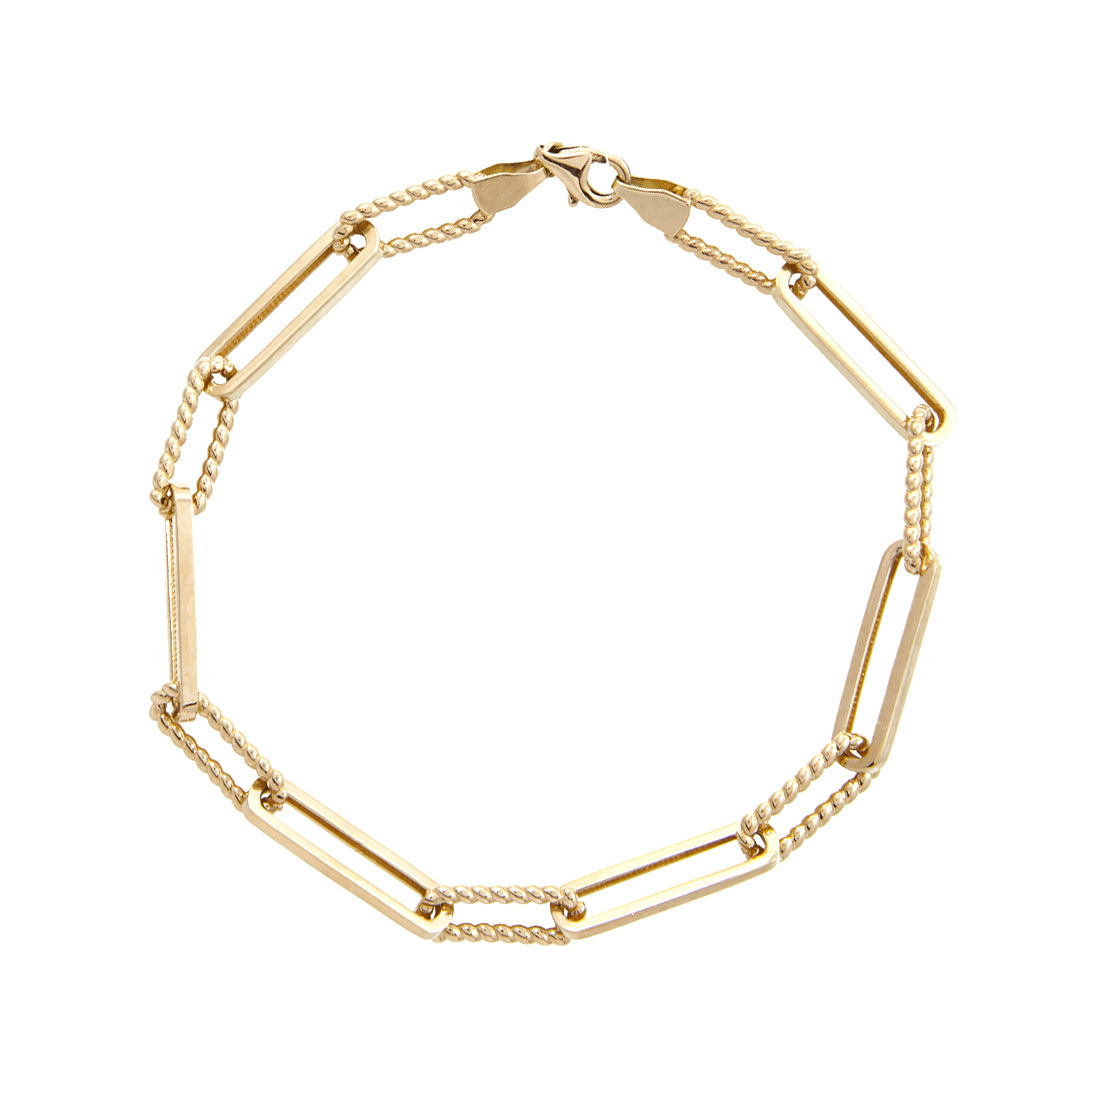 Yellow gold paperclip bracelet